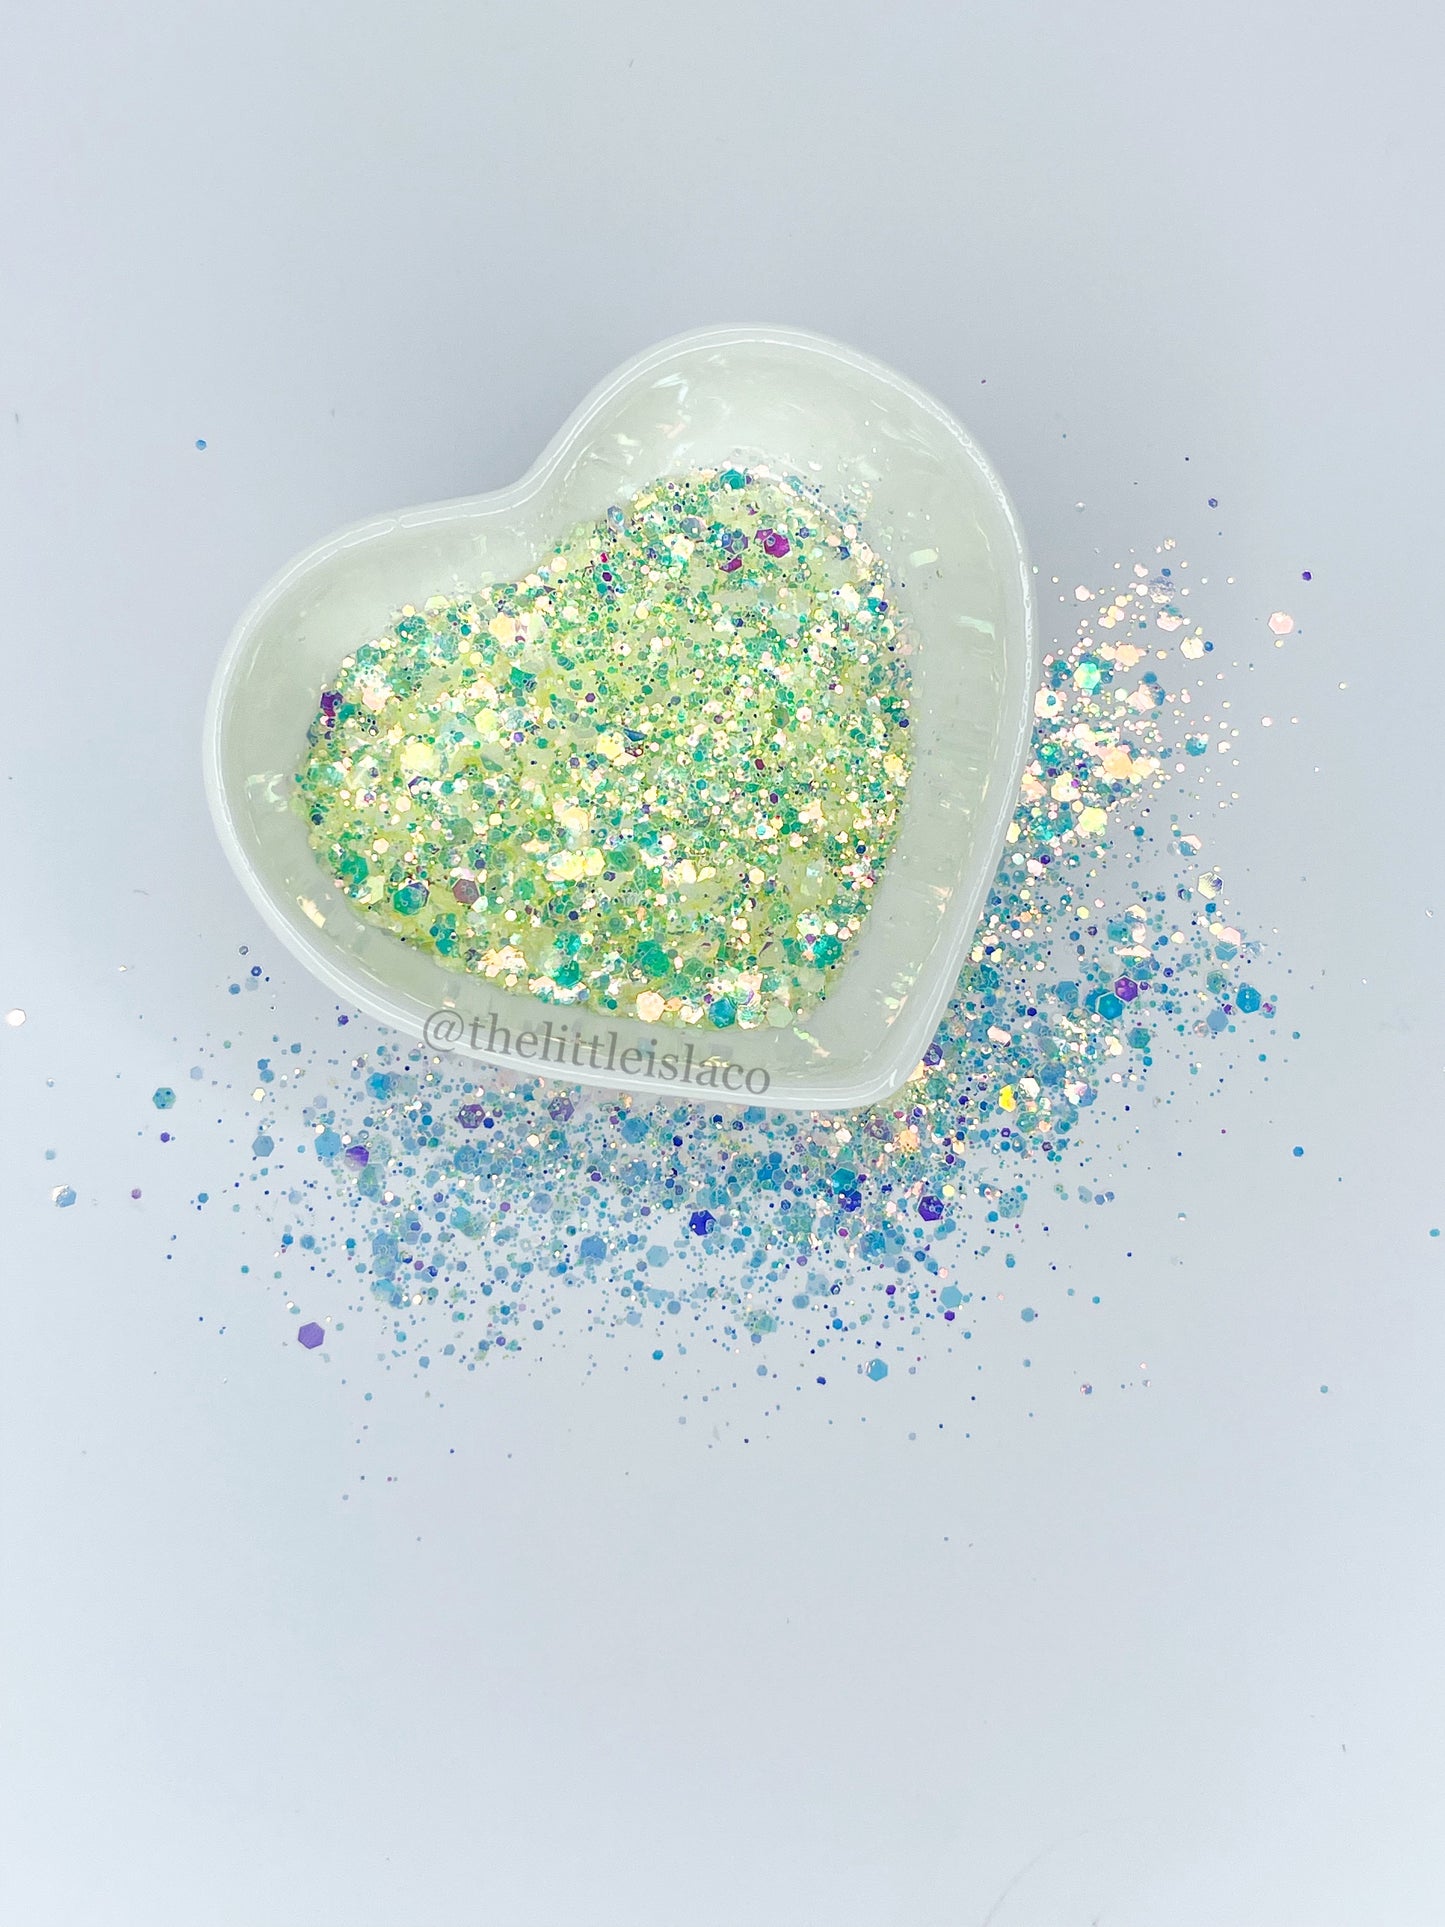 Chunky Glitter Mix - The OPALITE Collection ‘Australis' - 2oz/56g Pack